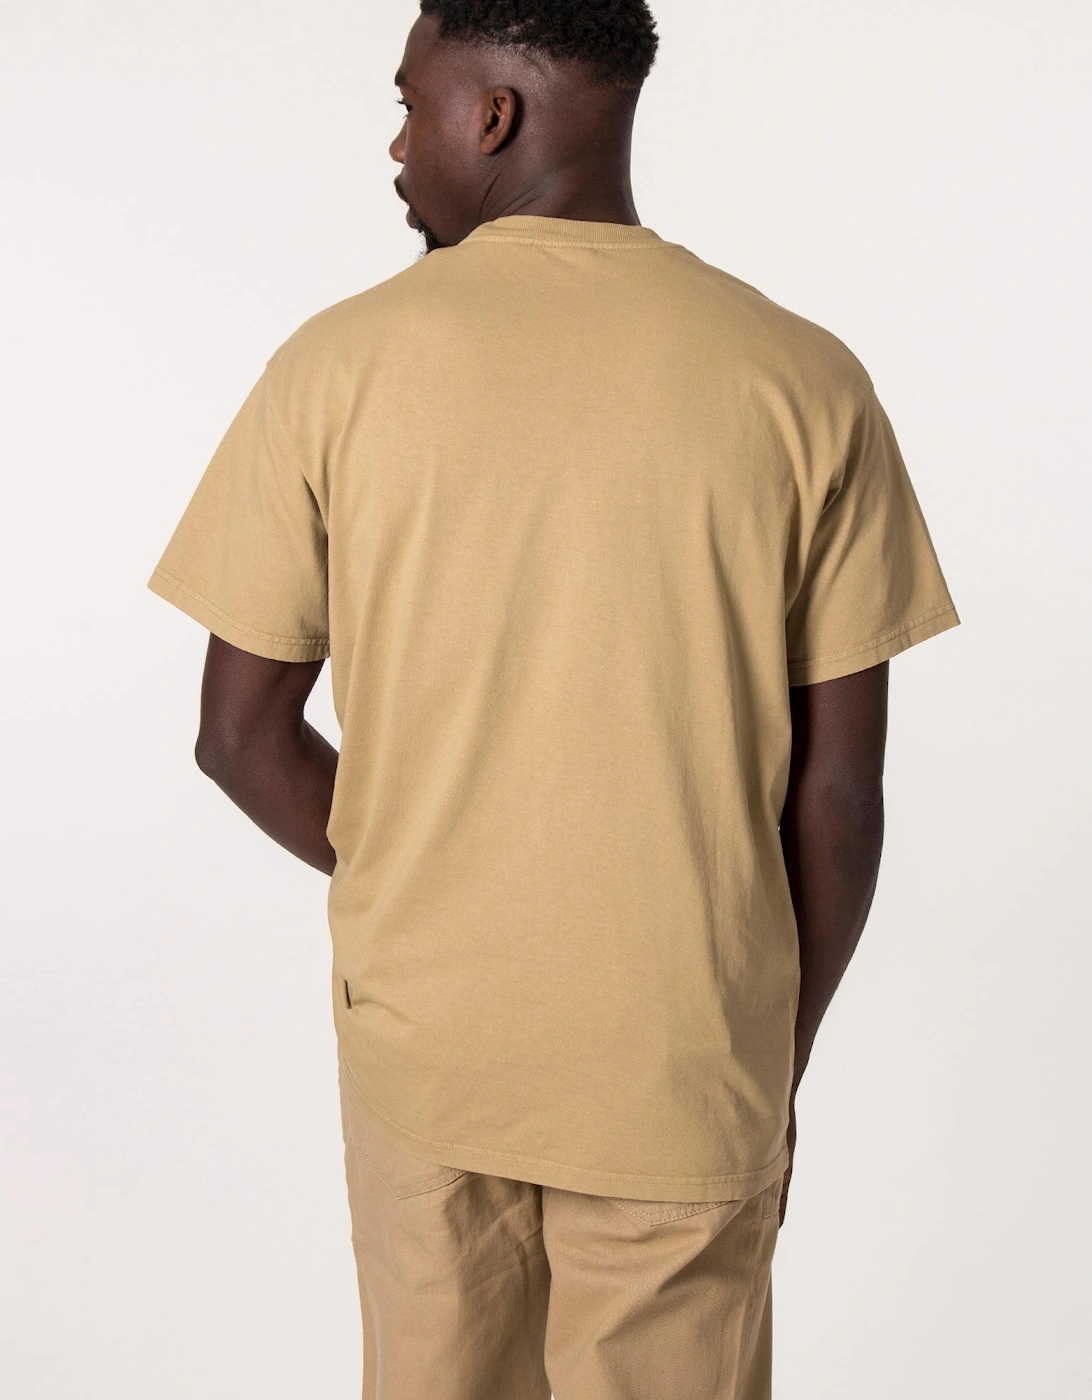 Relaxed Fit Worksite T-Shirt